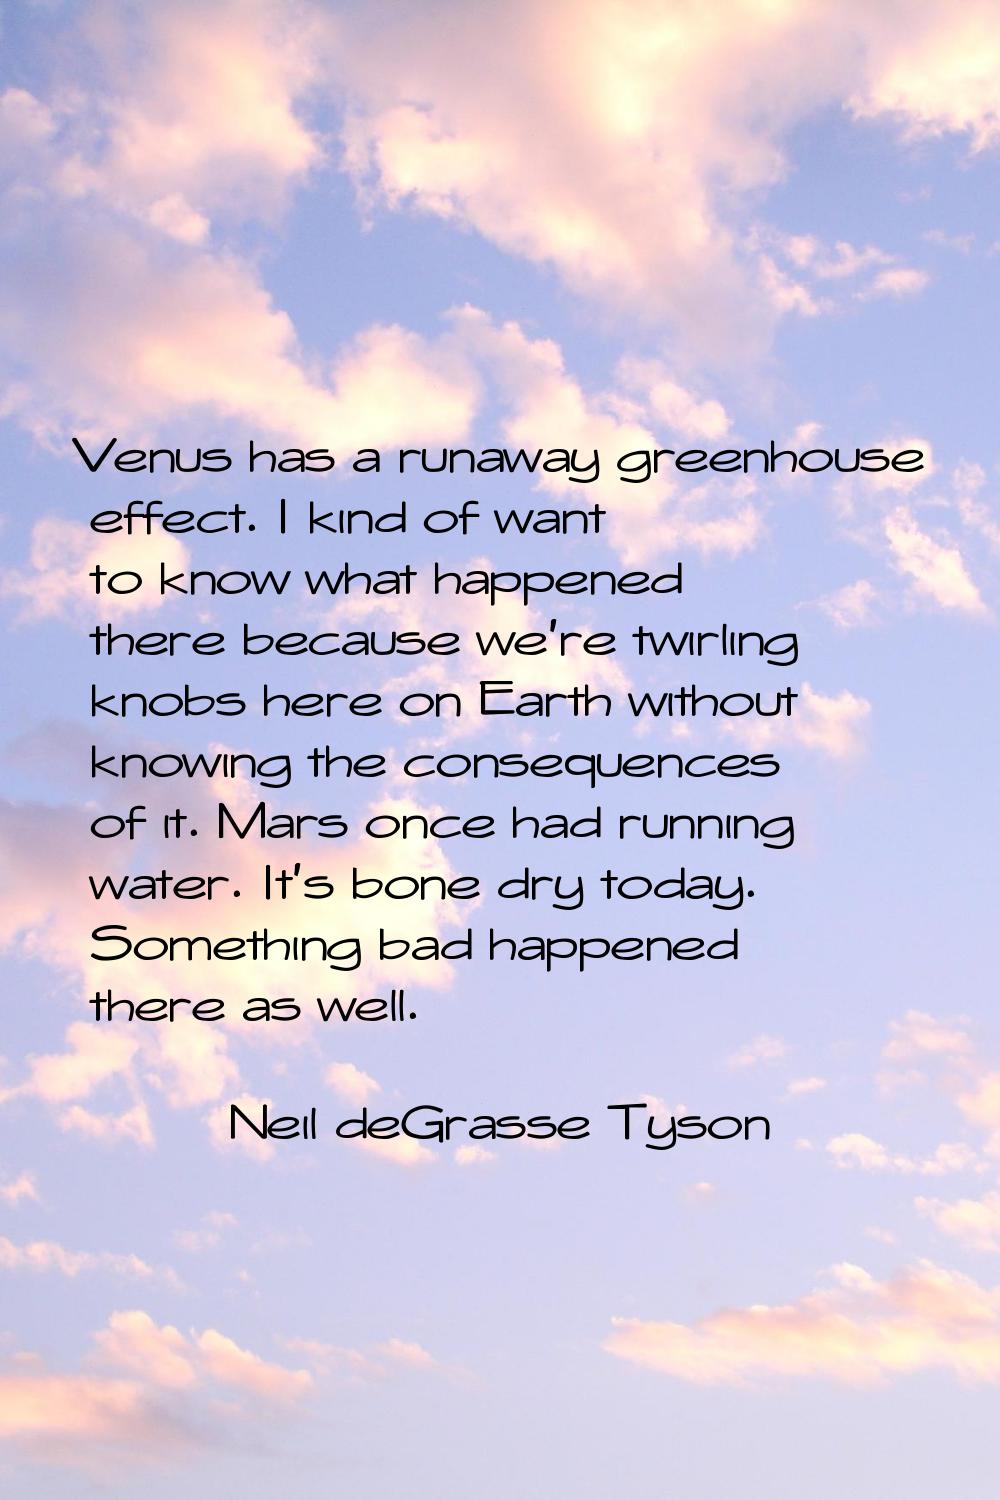 Venus has a runaway greenhouse effect. I kind of want to know what happened there because we're twi